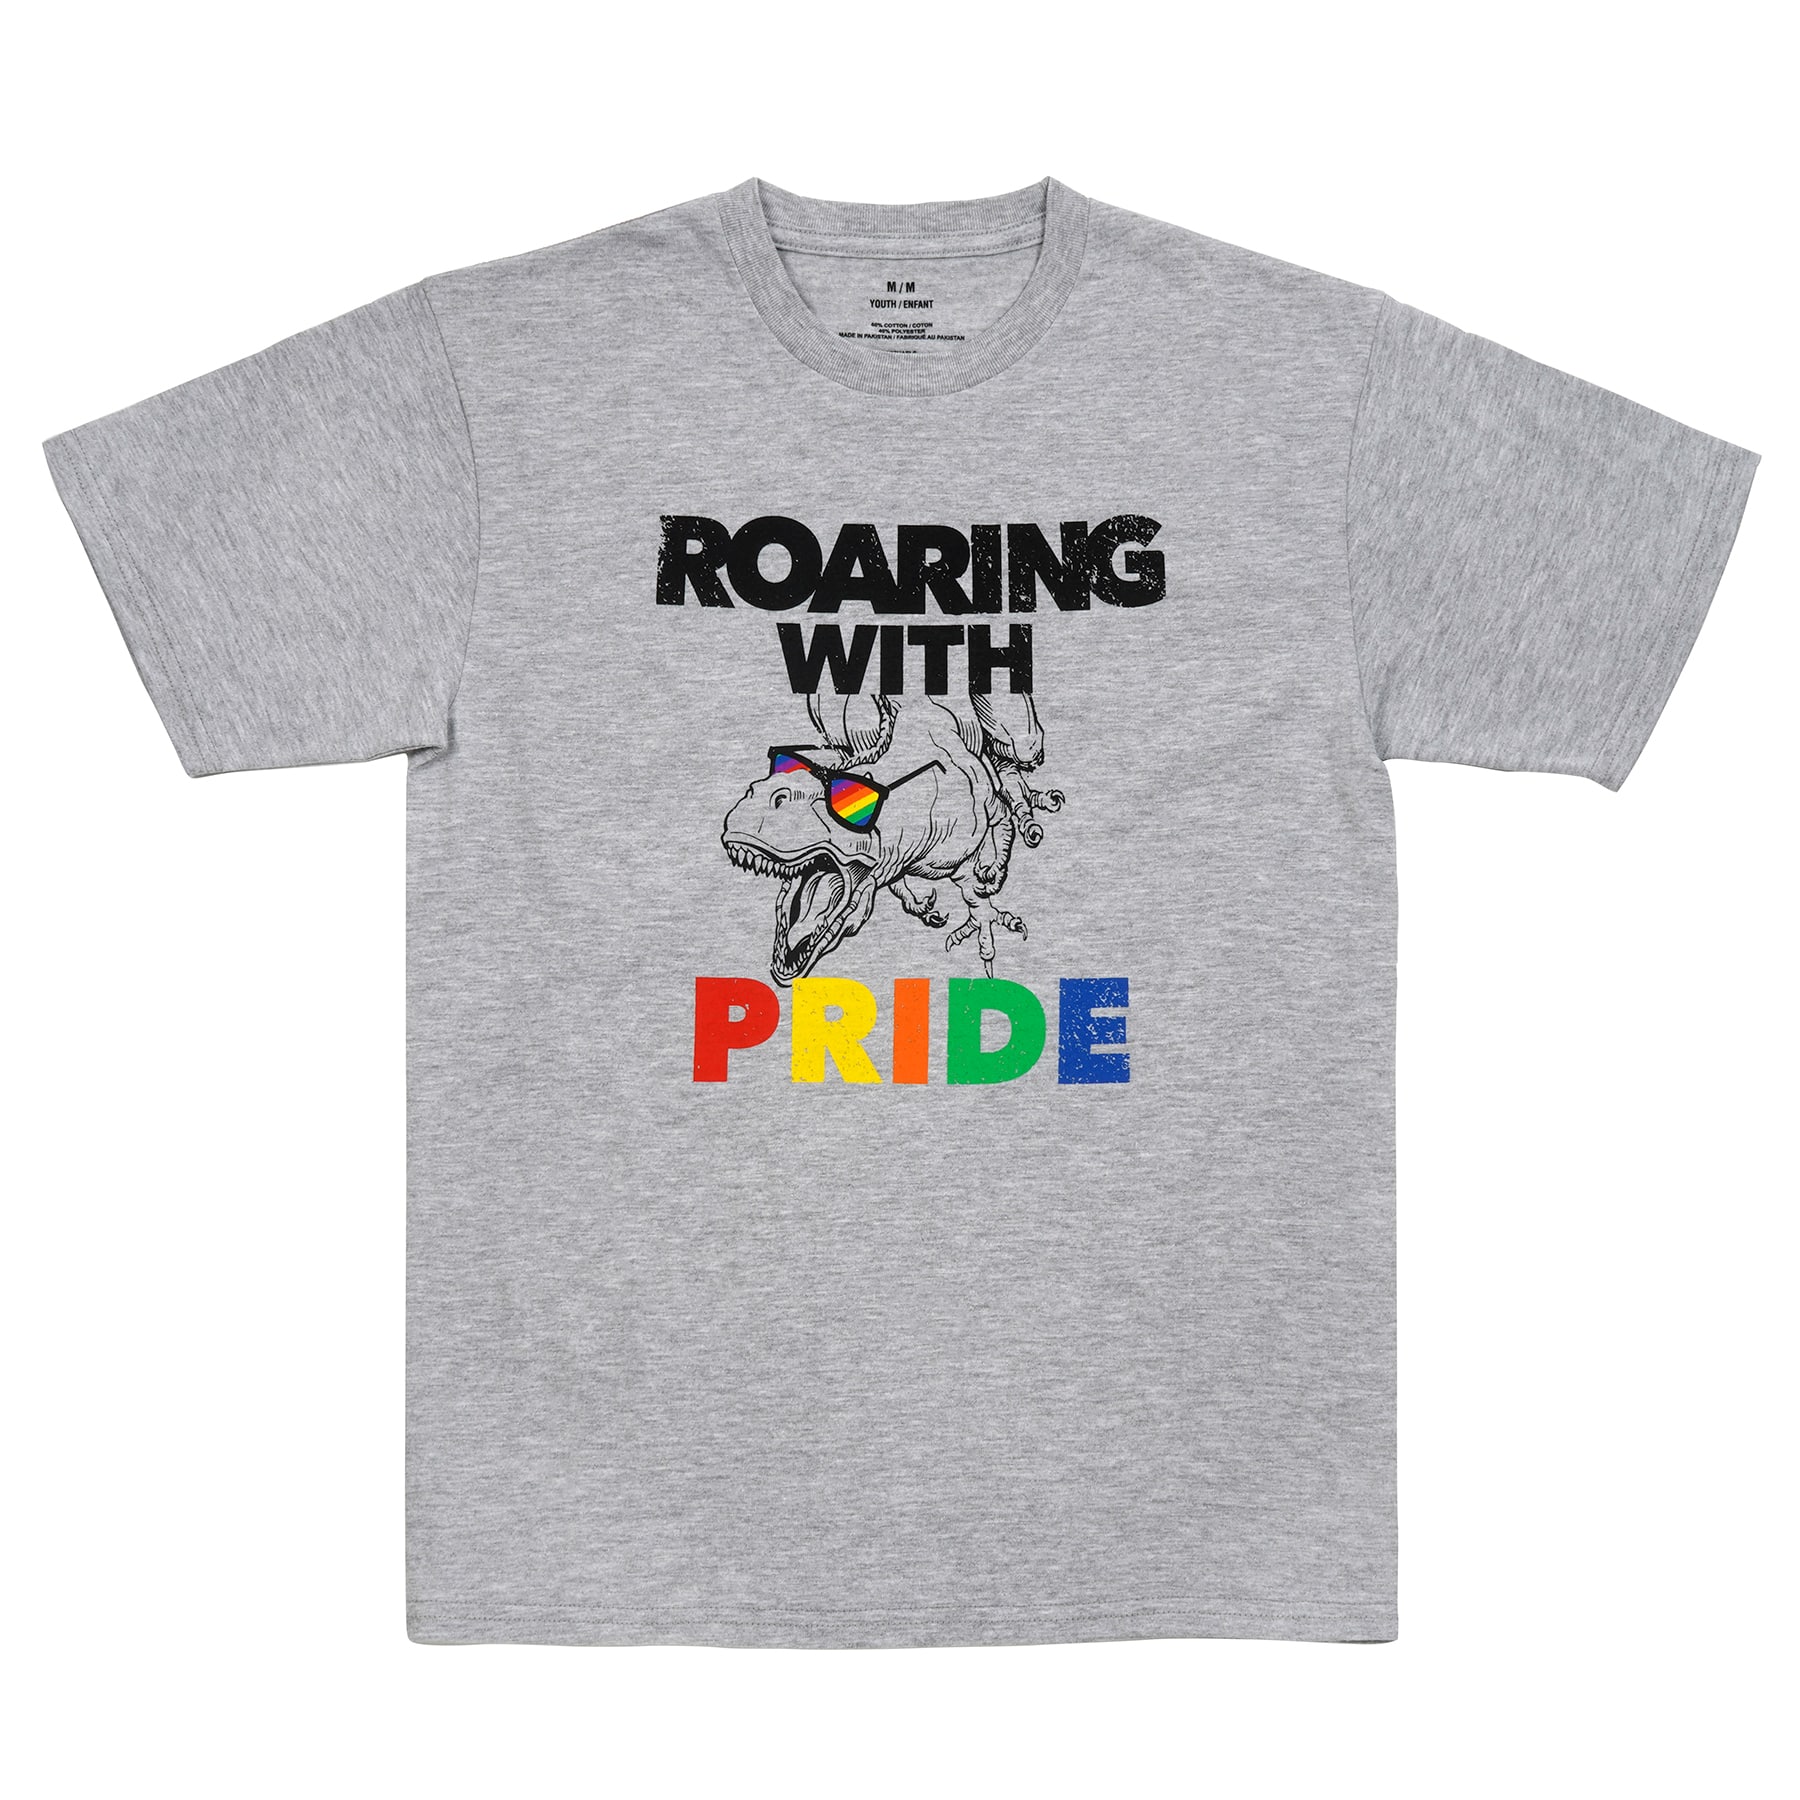 Roaring with Pride Youth T-Shirt